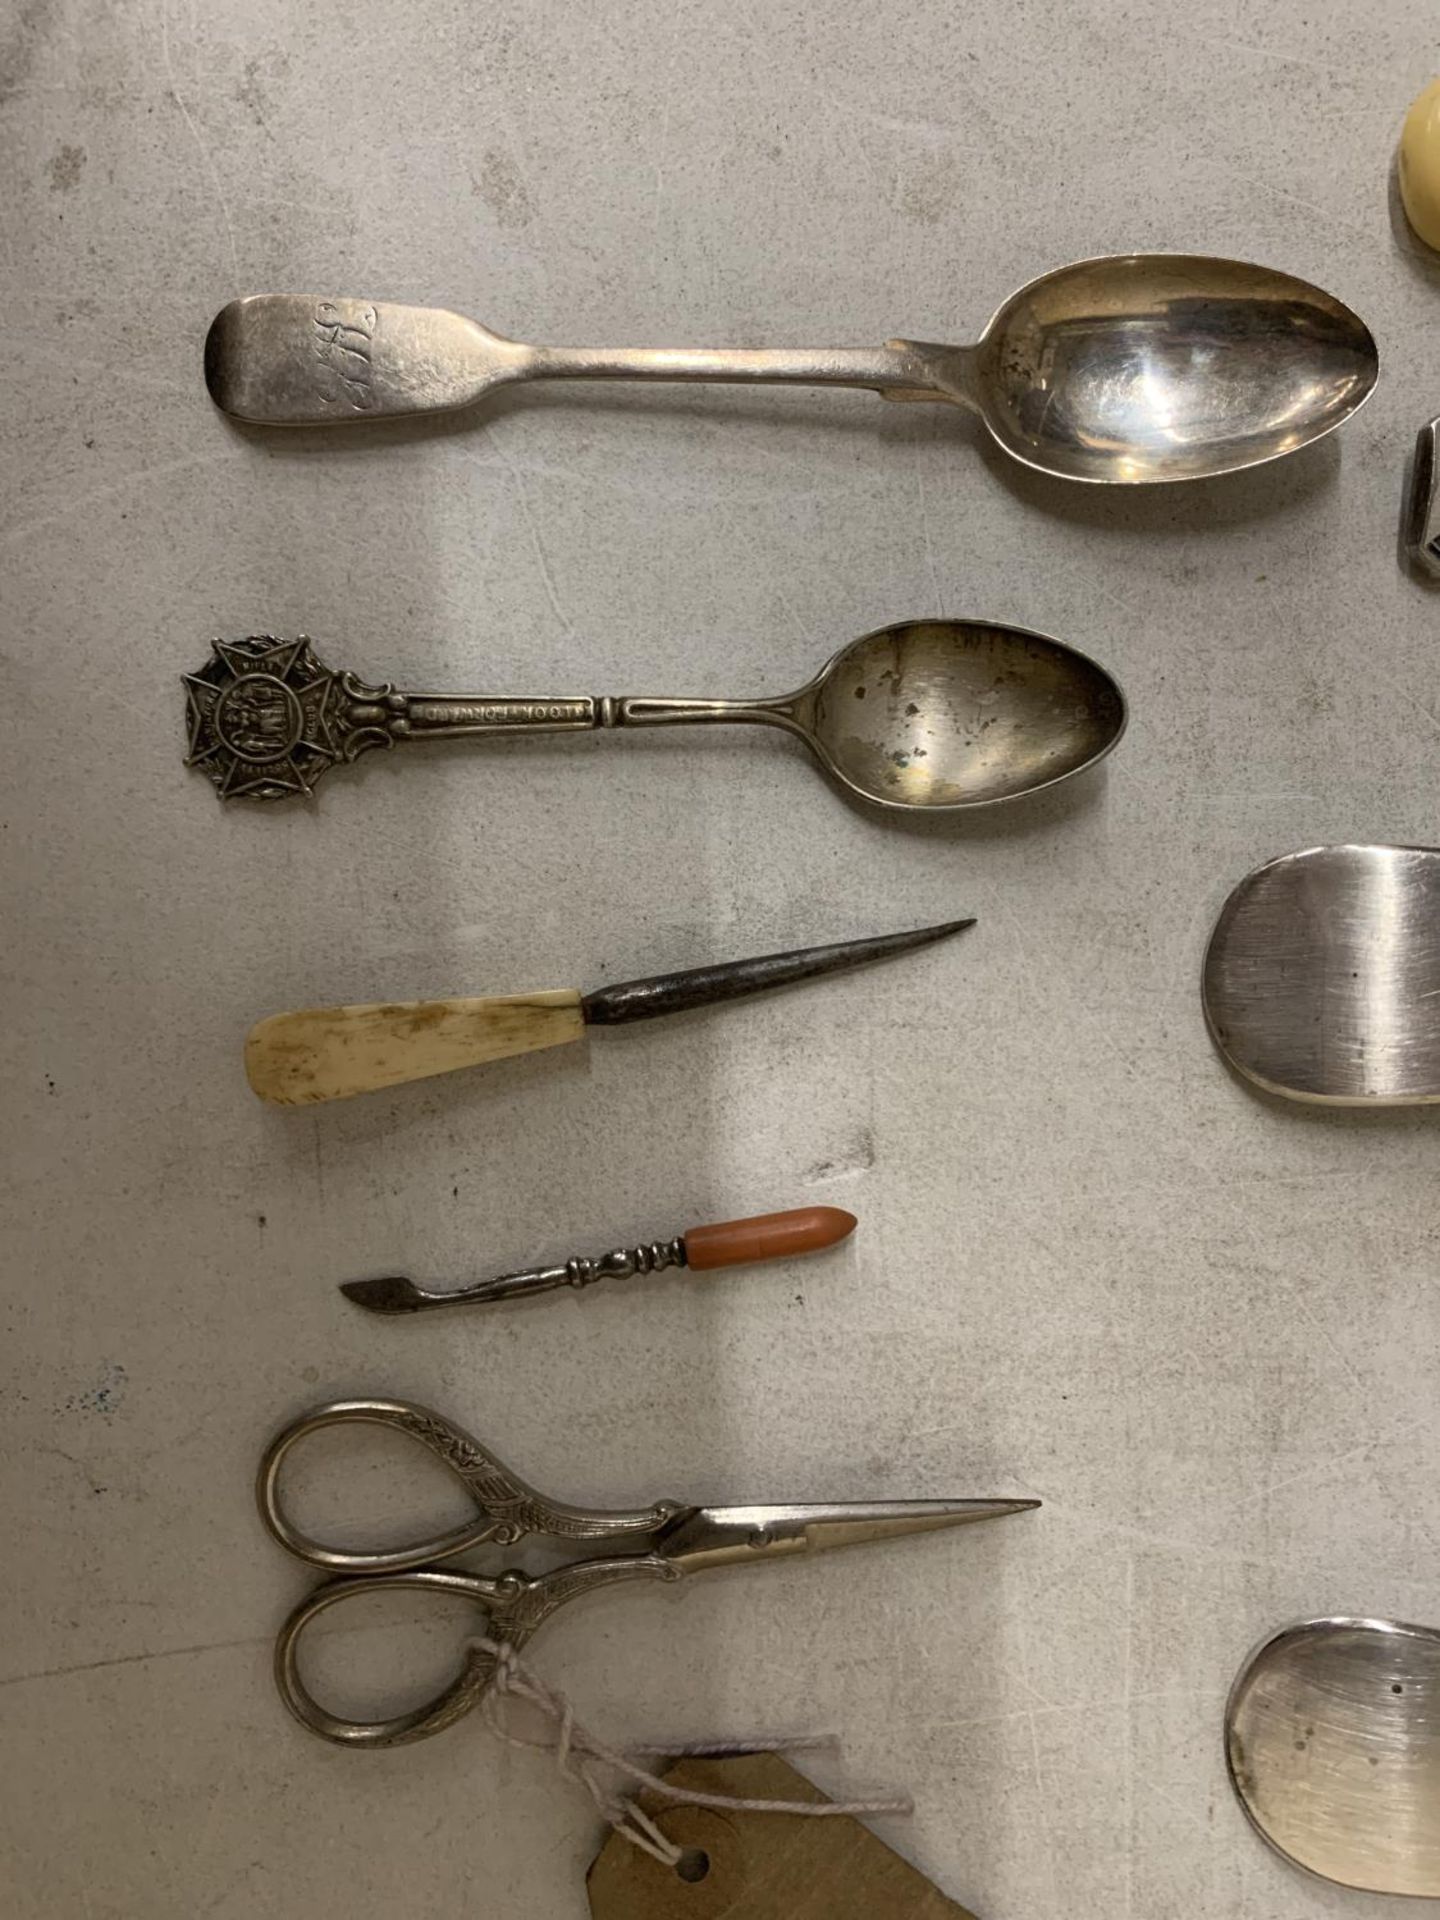 A QUANTITY OF VINTAGE FLATWARE TO INCLUDE A LARGE BERRY SPOON, SERVING SPOONS, MUFFIN FORK, SCISSORS - Image 3 of 4